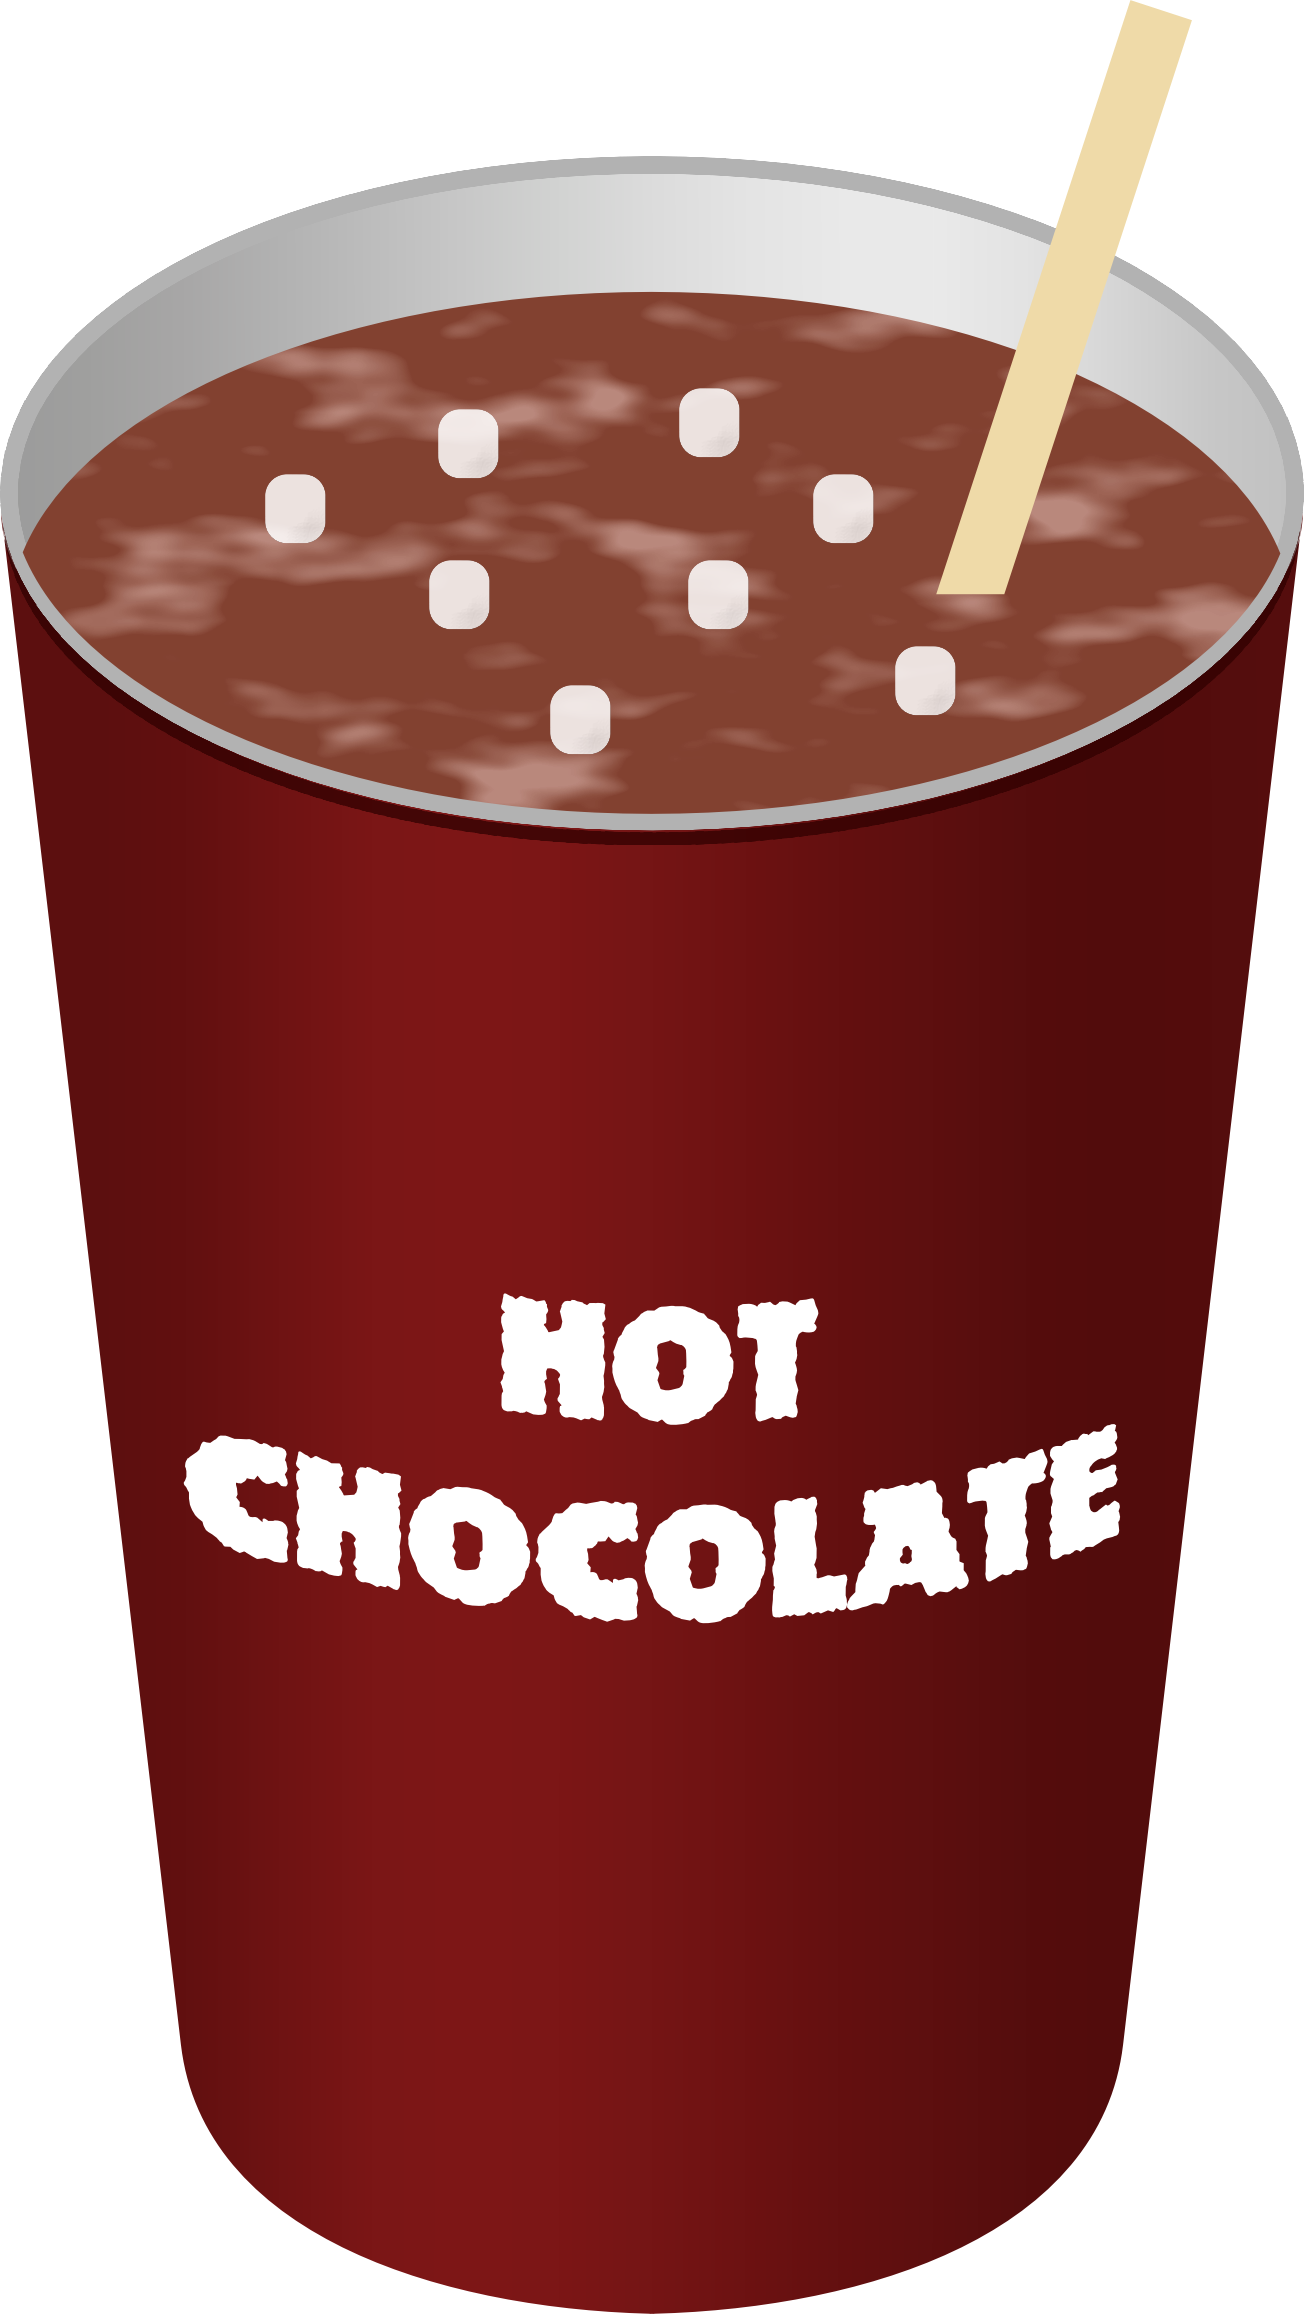 Hot chocolate big image. Marshmallow clipart stick clipart